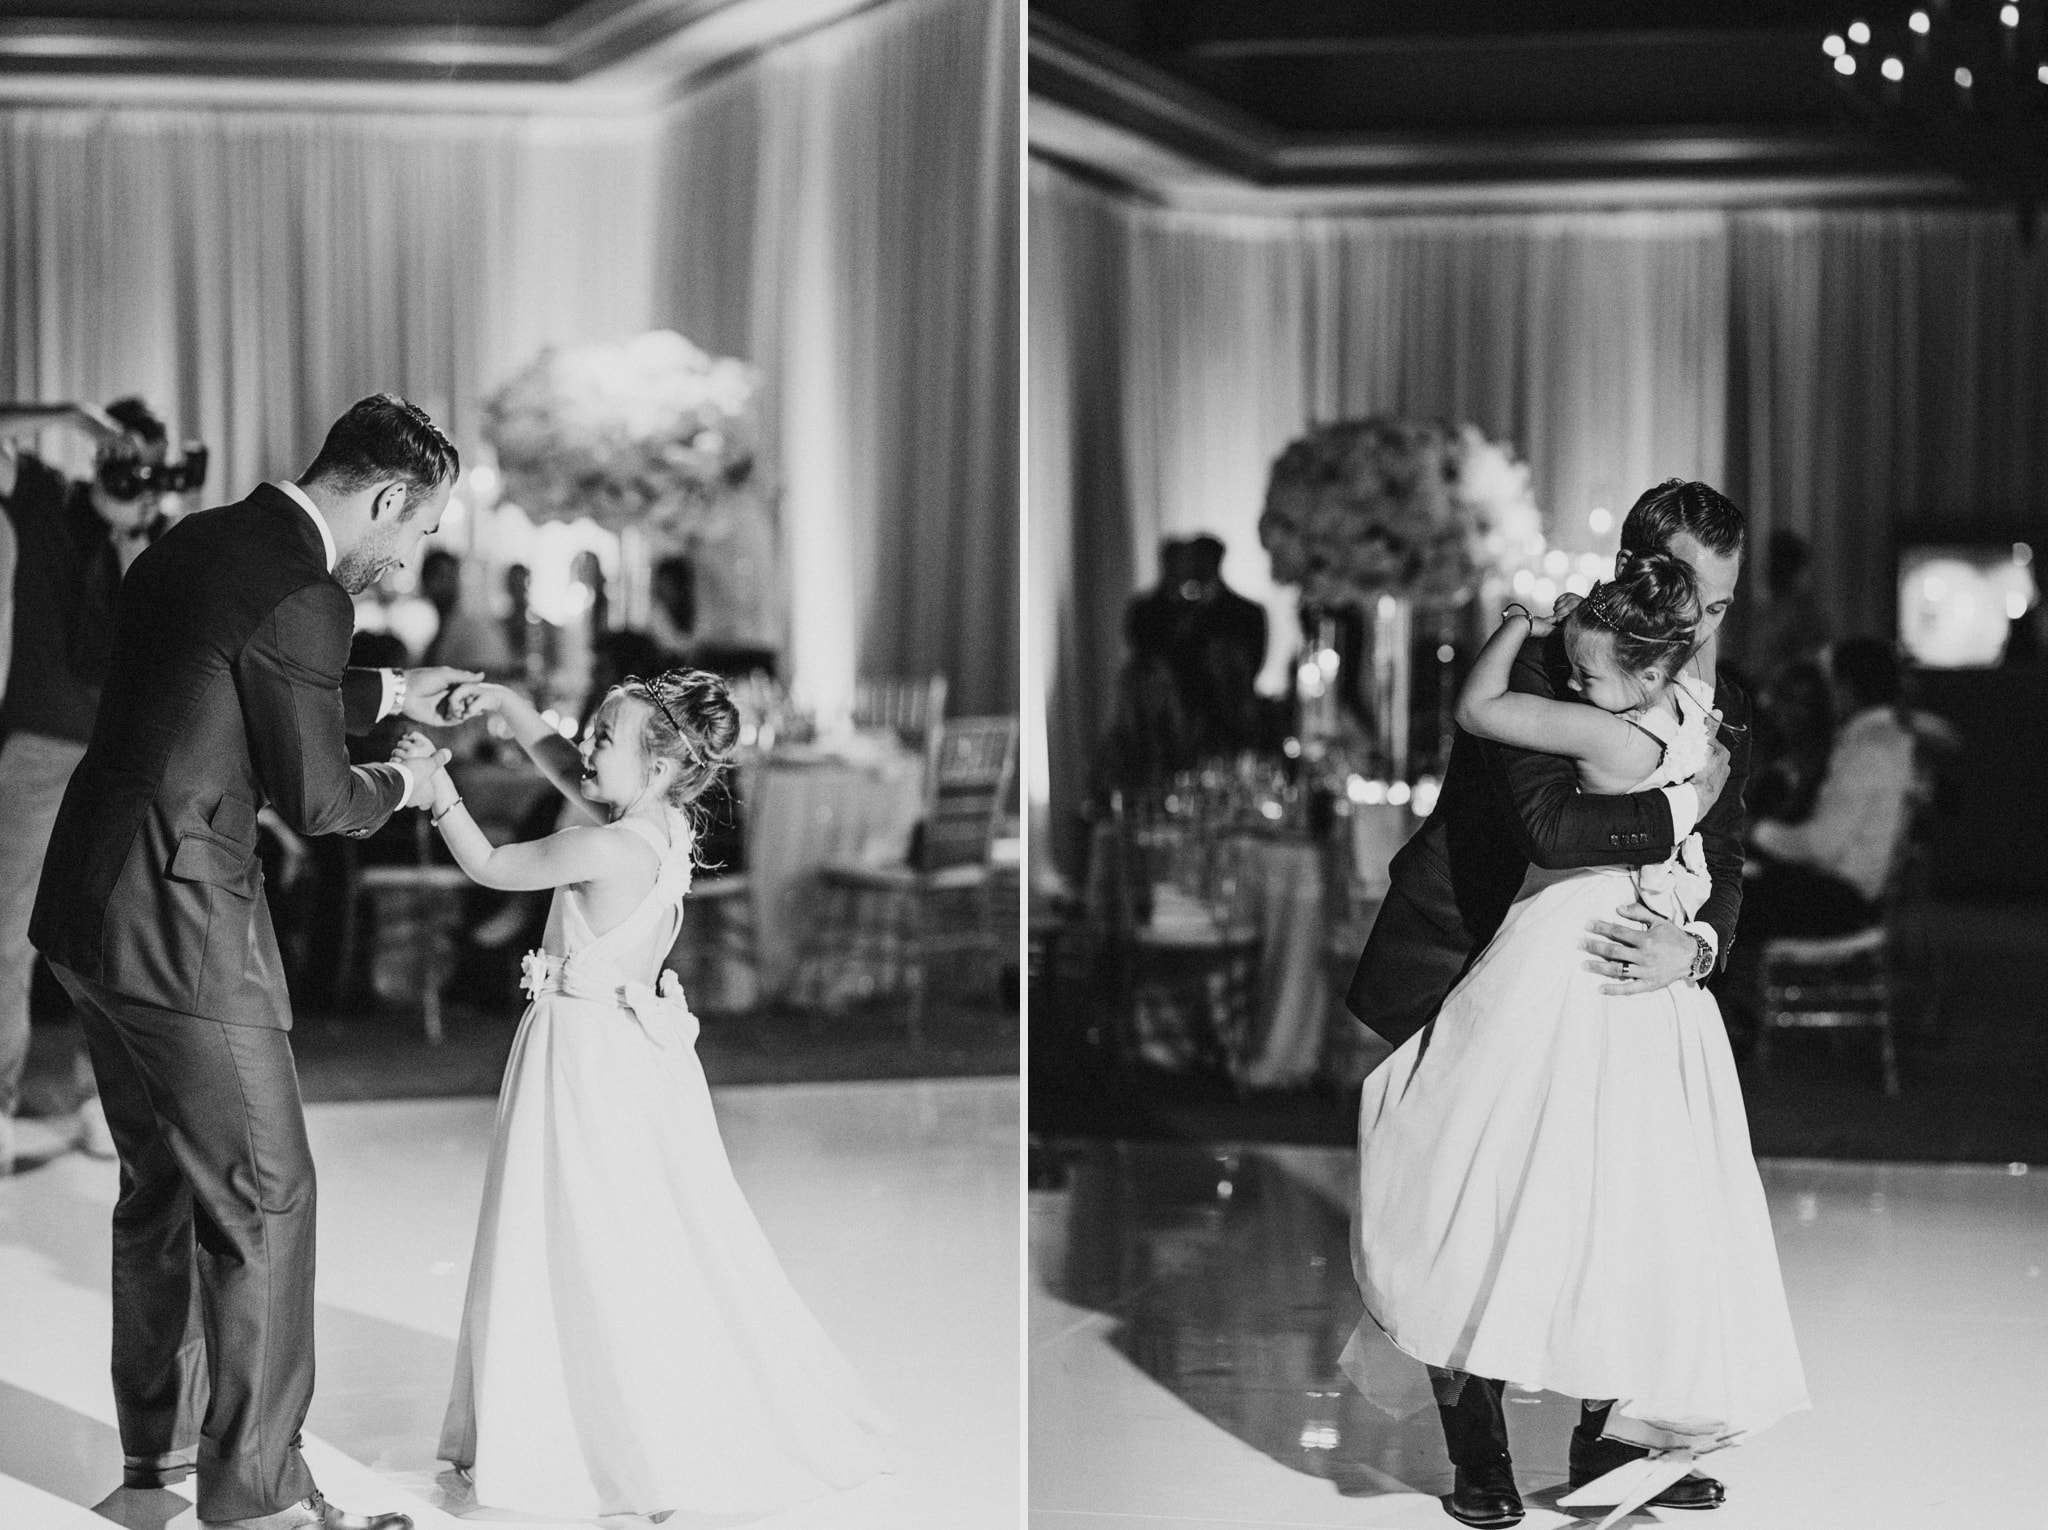 A groom dances with the flower girl during a Newport Beach wedding reception at The Resort at Pelican Hill.